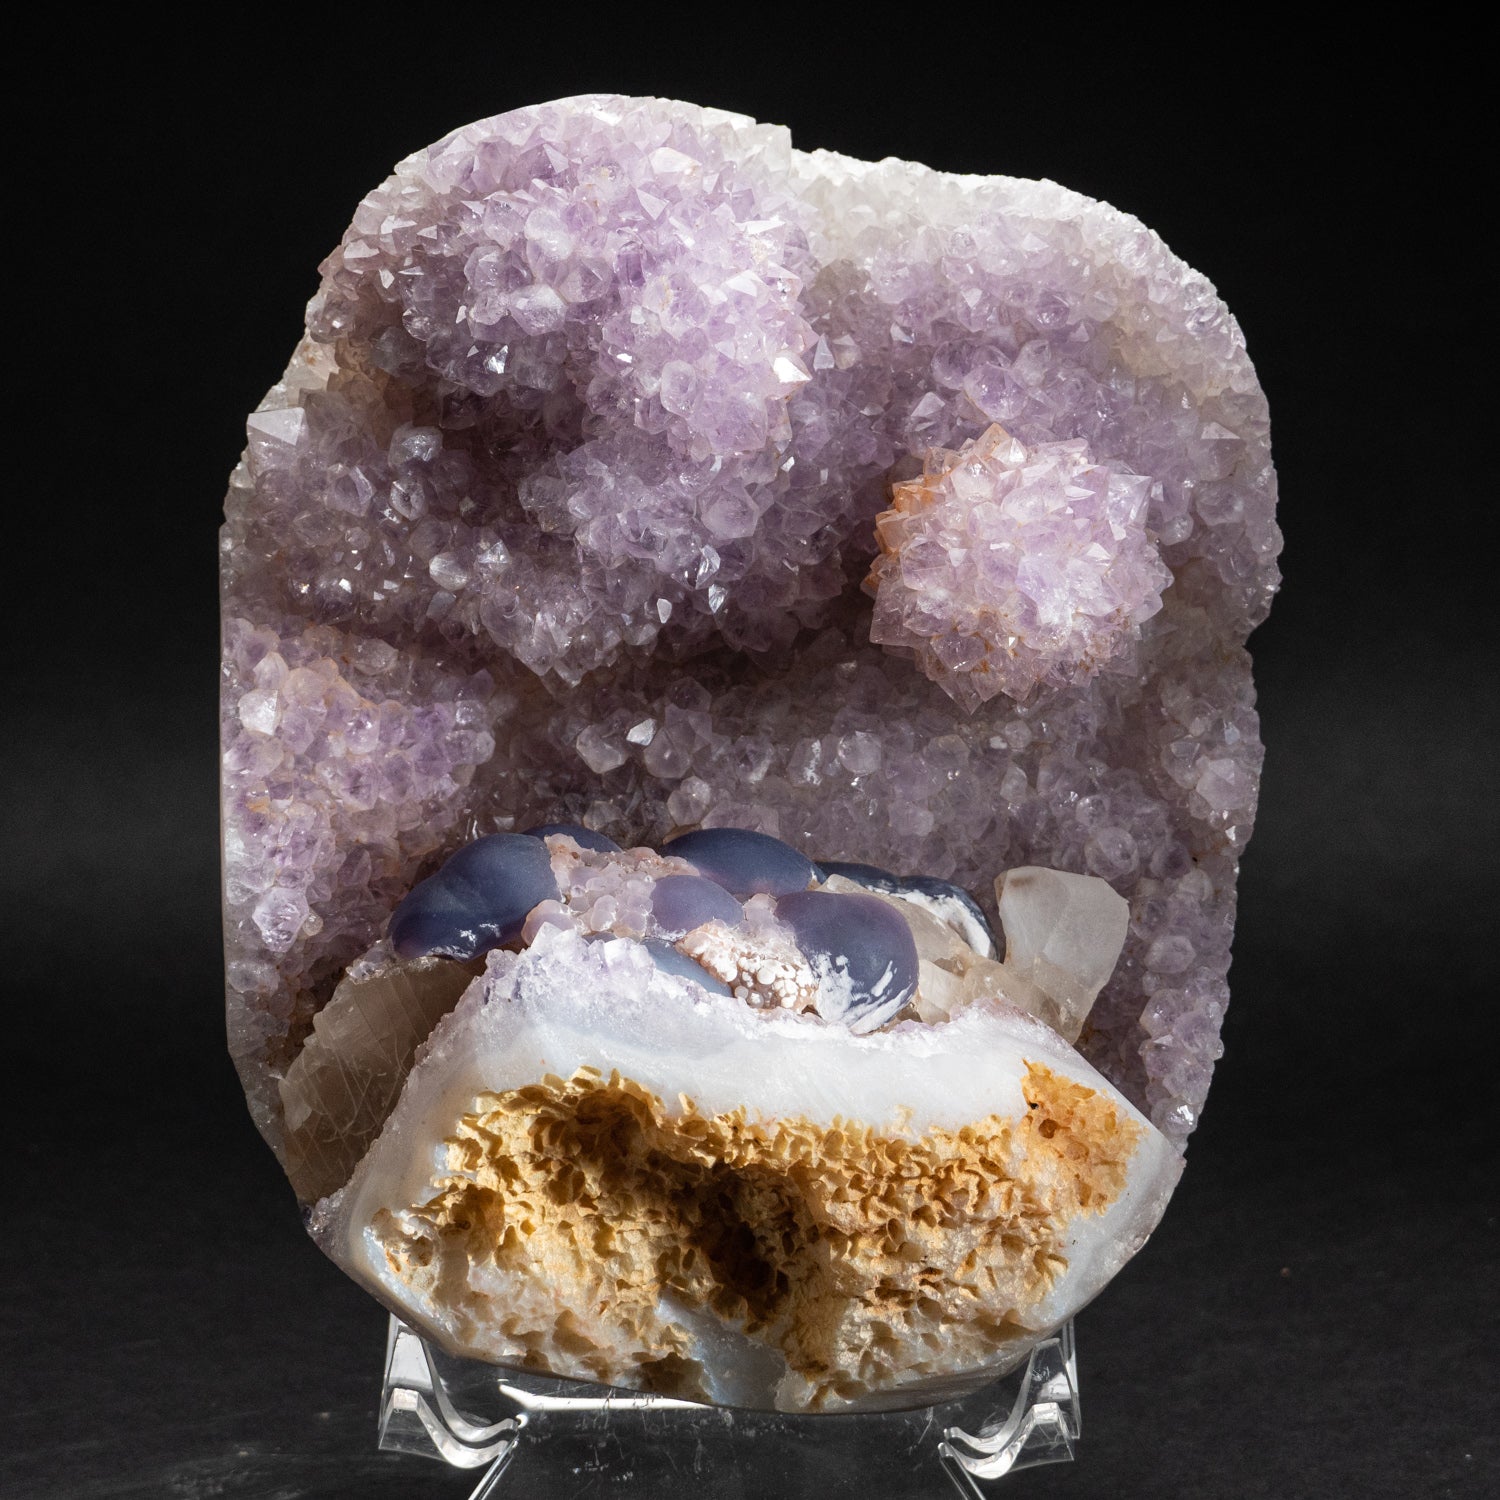 Large Amethyst Crystal Cluster with Purple Fluorite